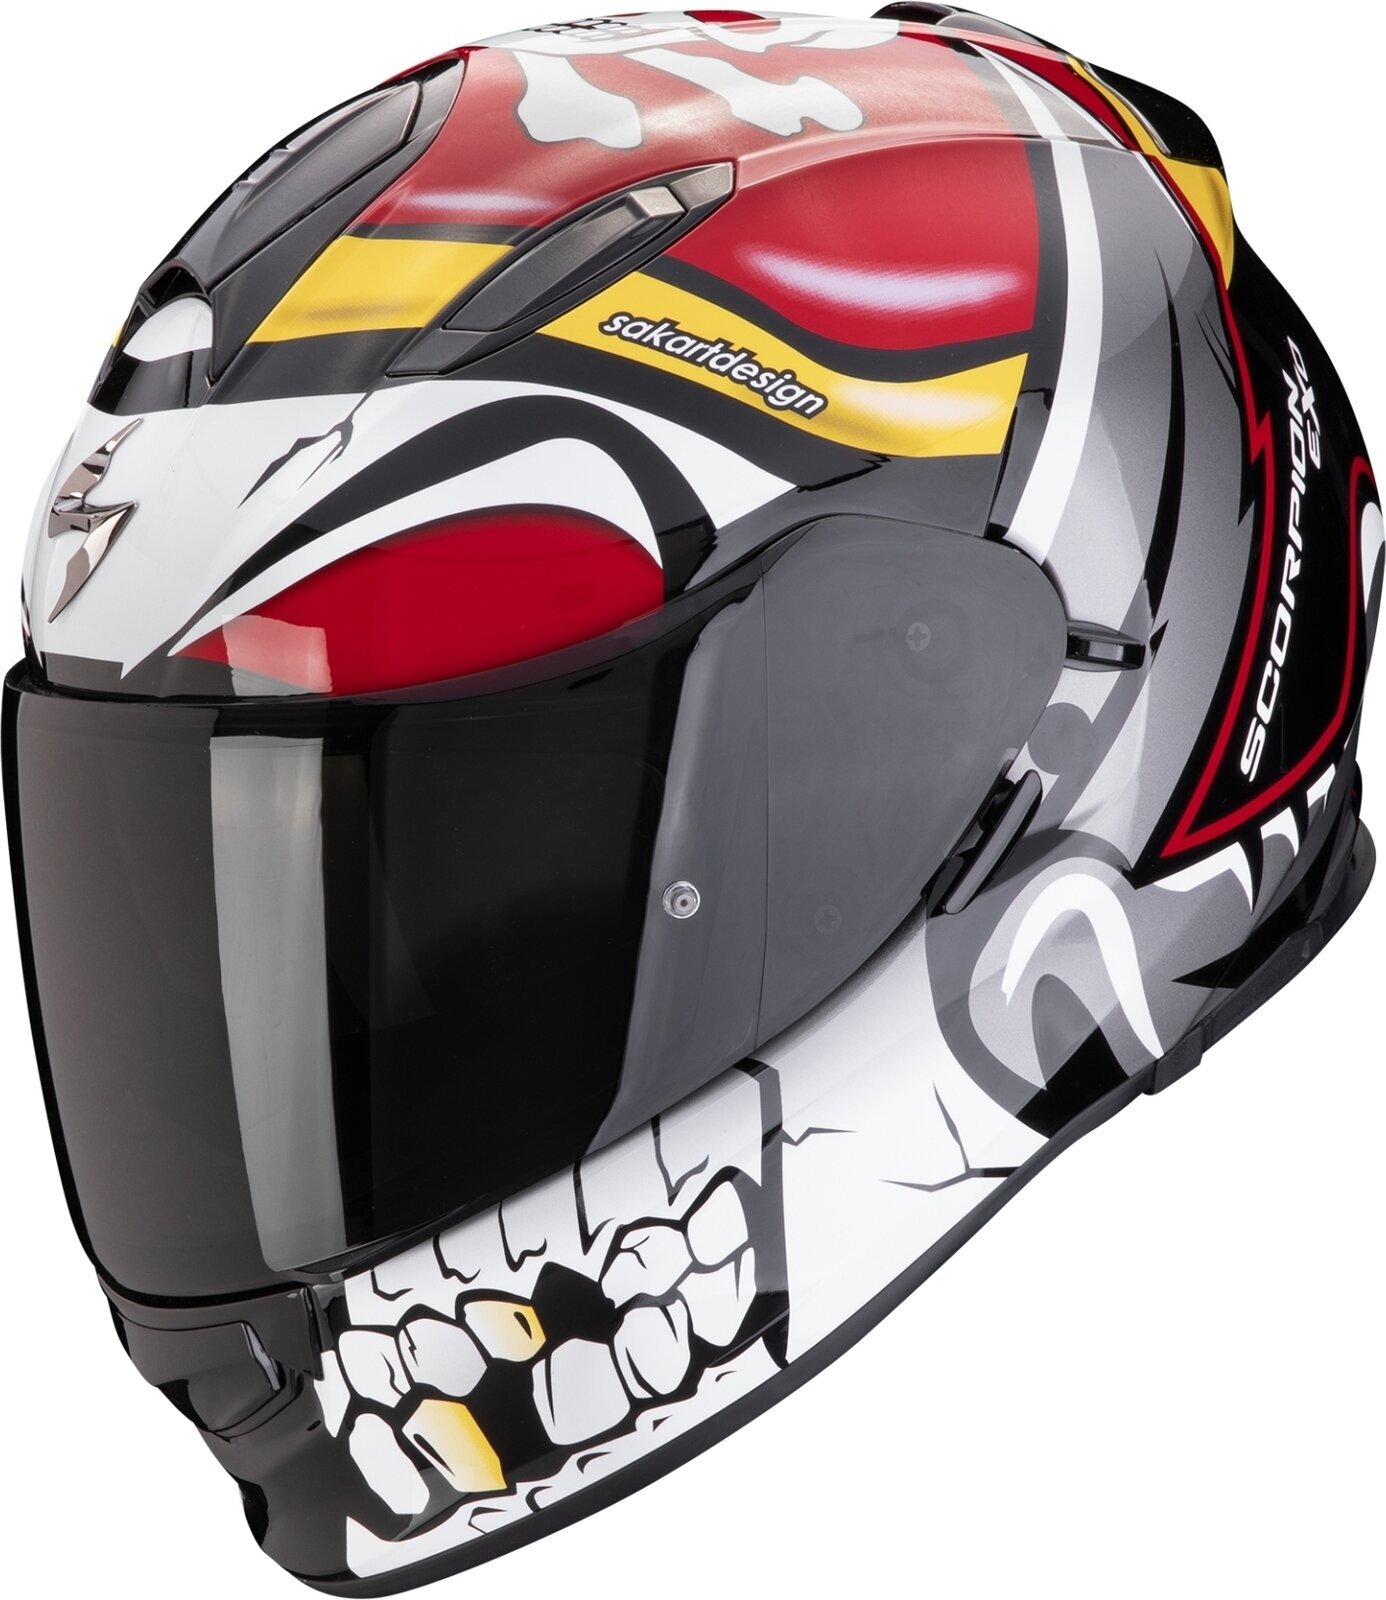 Helm Scorpion EXO 491 PIRATE Red L Helm